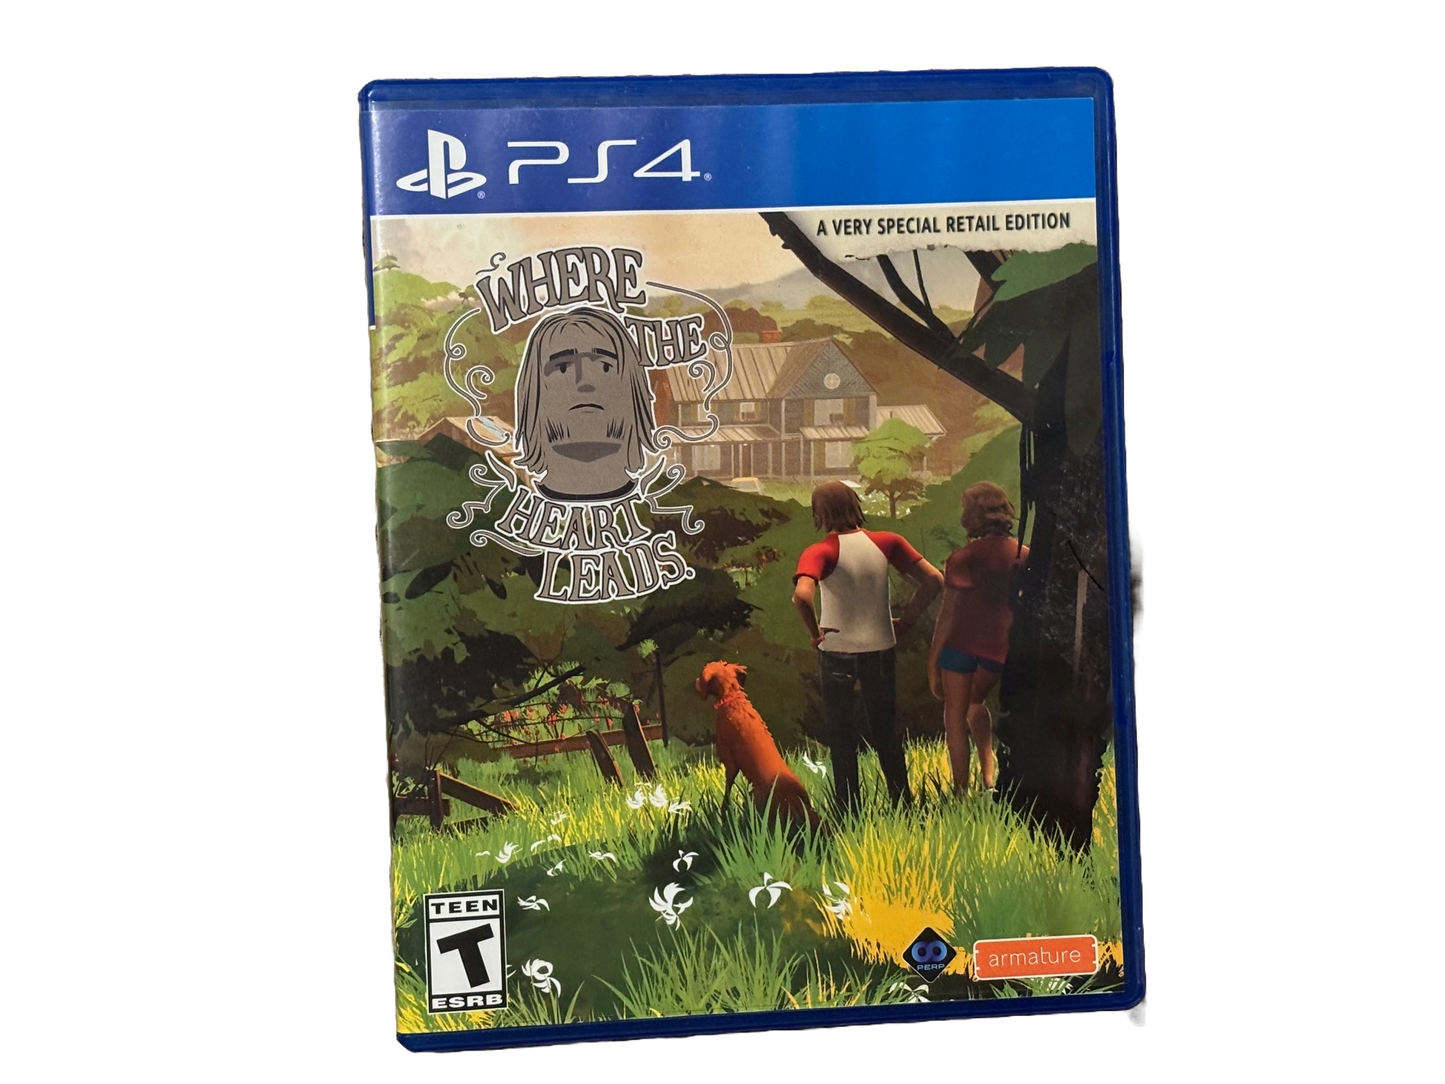 Where The Heart Leads Sony PlayStation 4 PS4 Complete